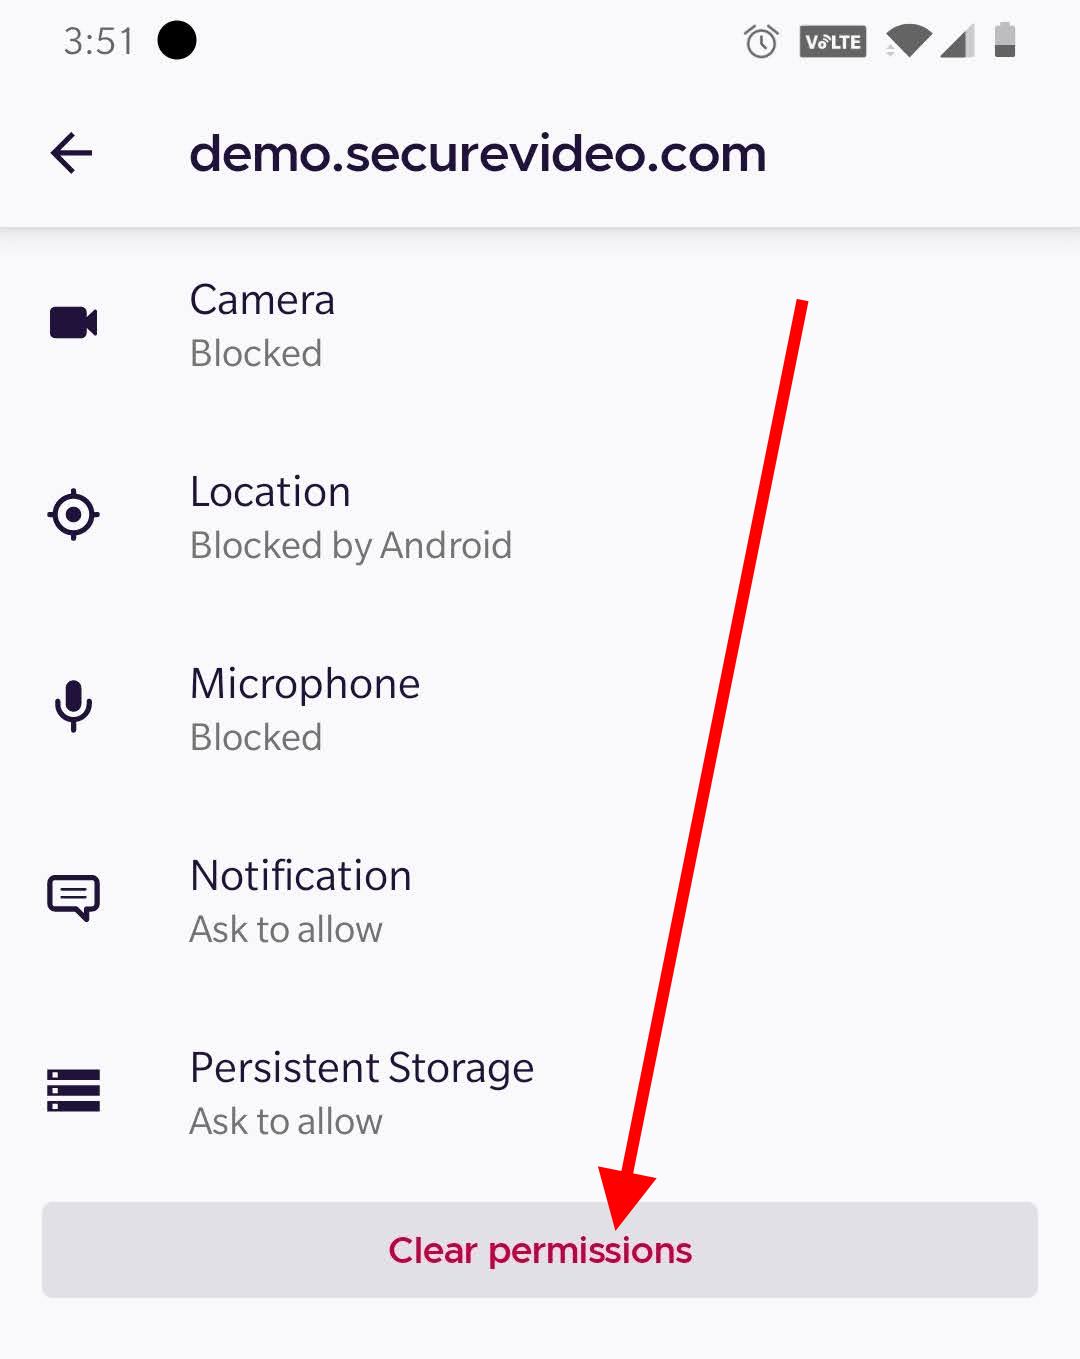 Arrow pointing to "Clear permissions"